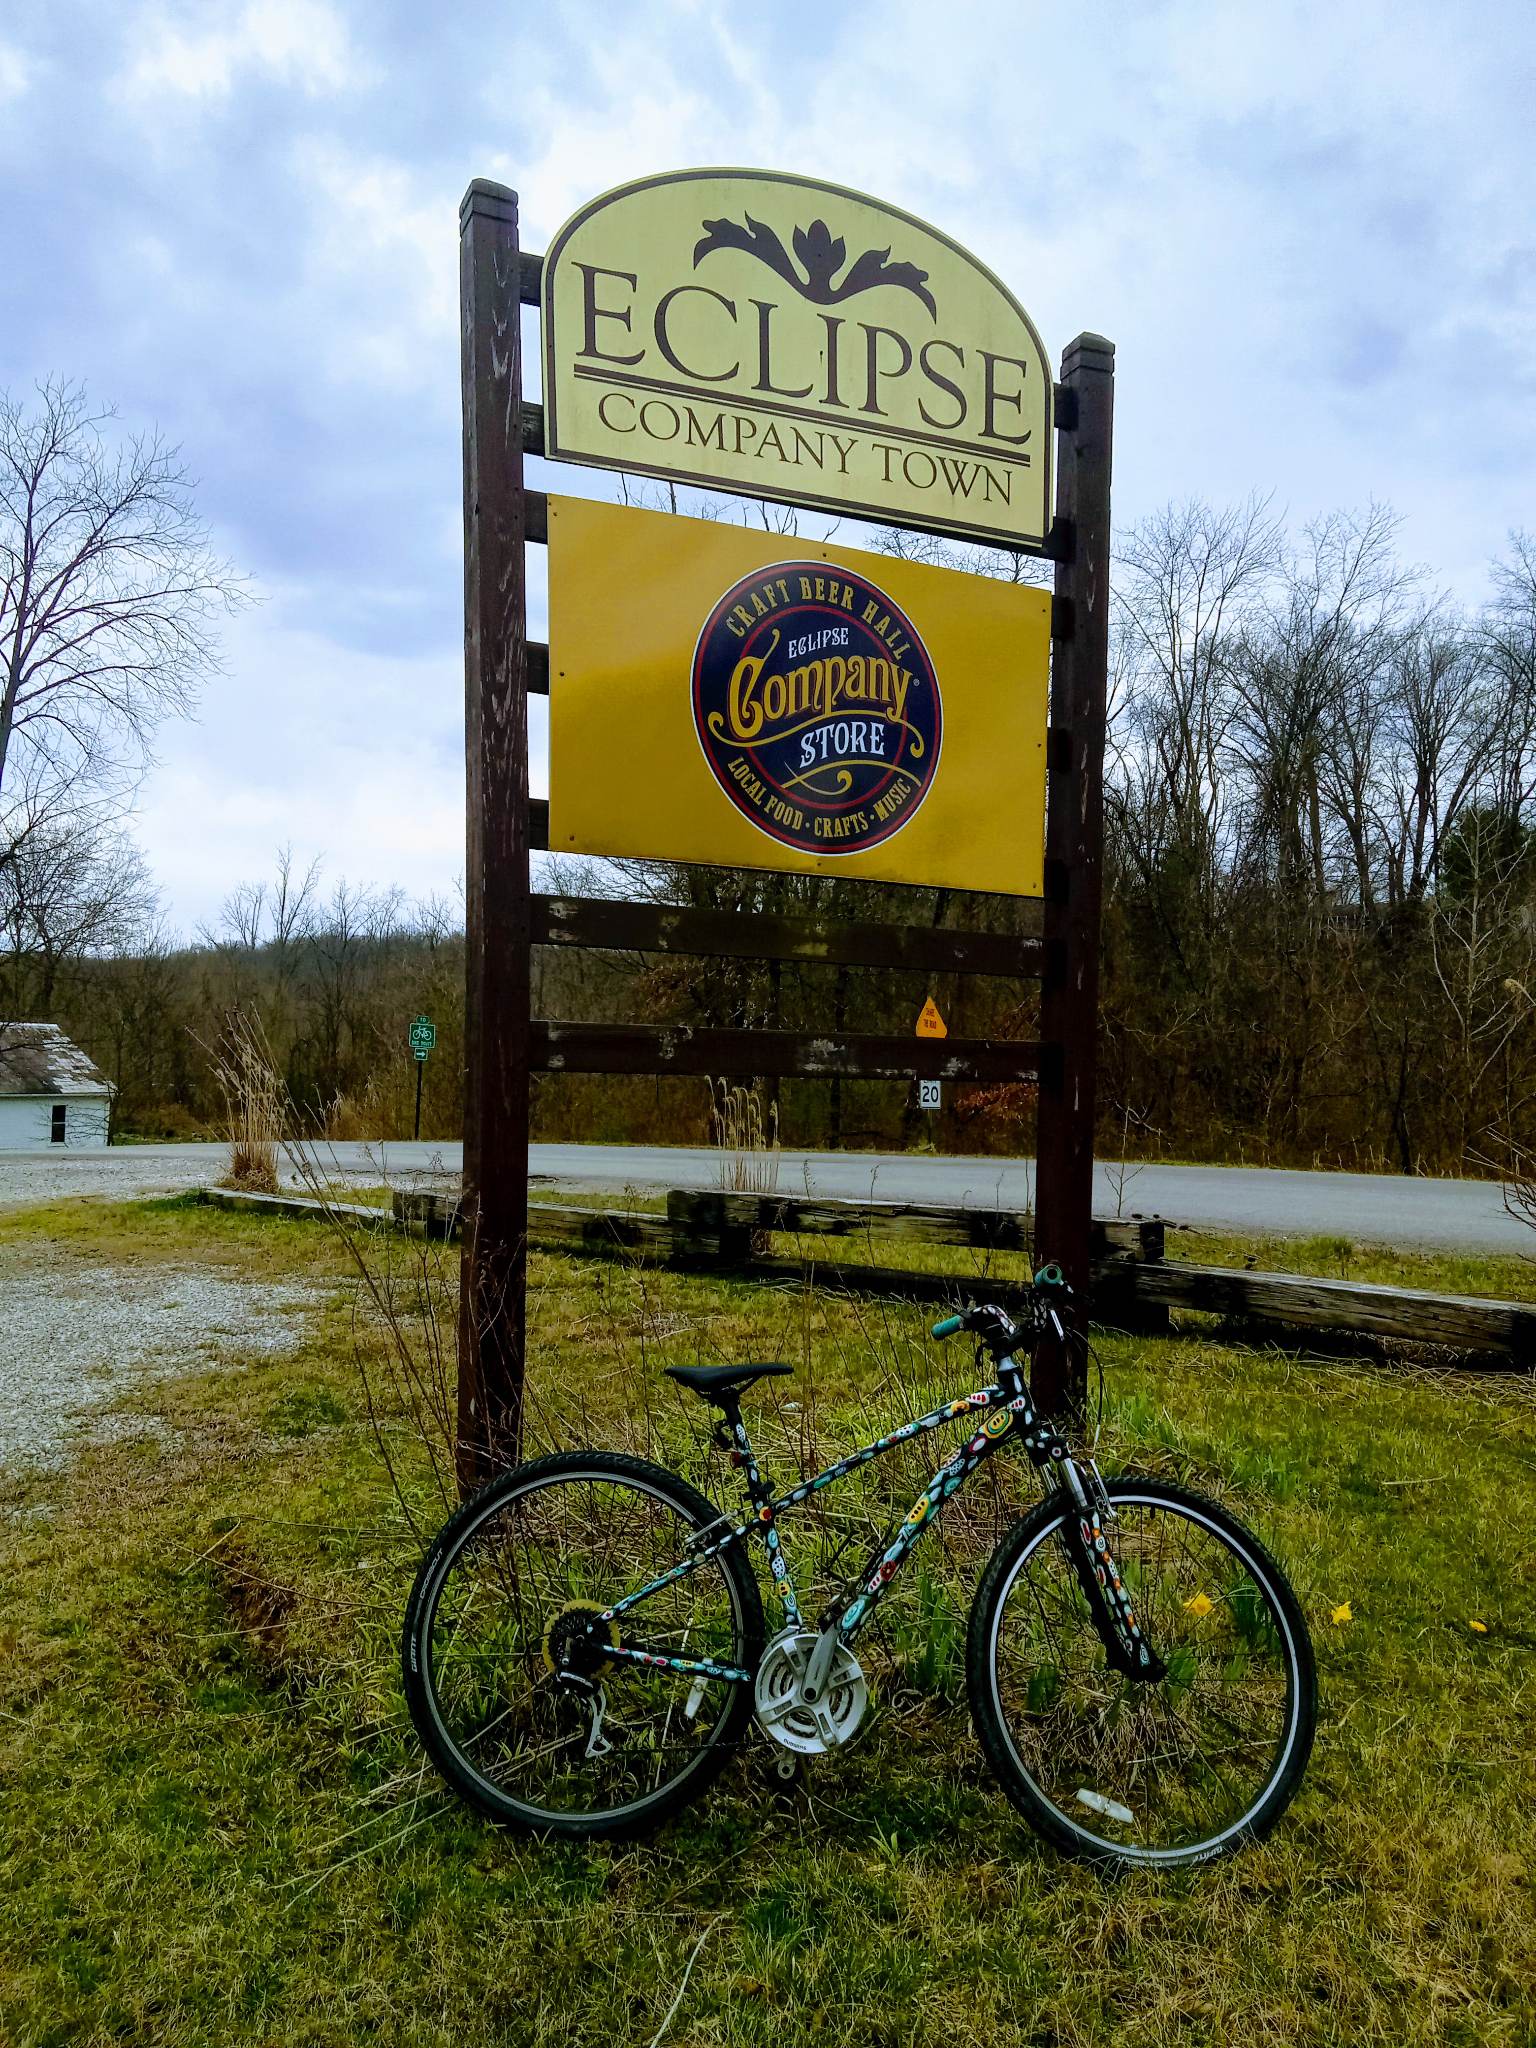 A picture of the Eclipse Company Store sign and a bike.